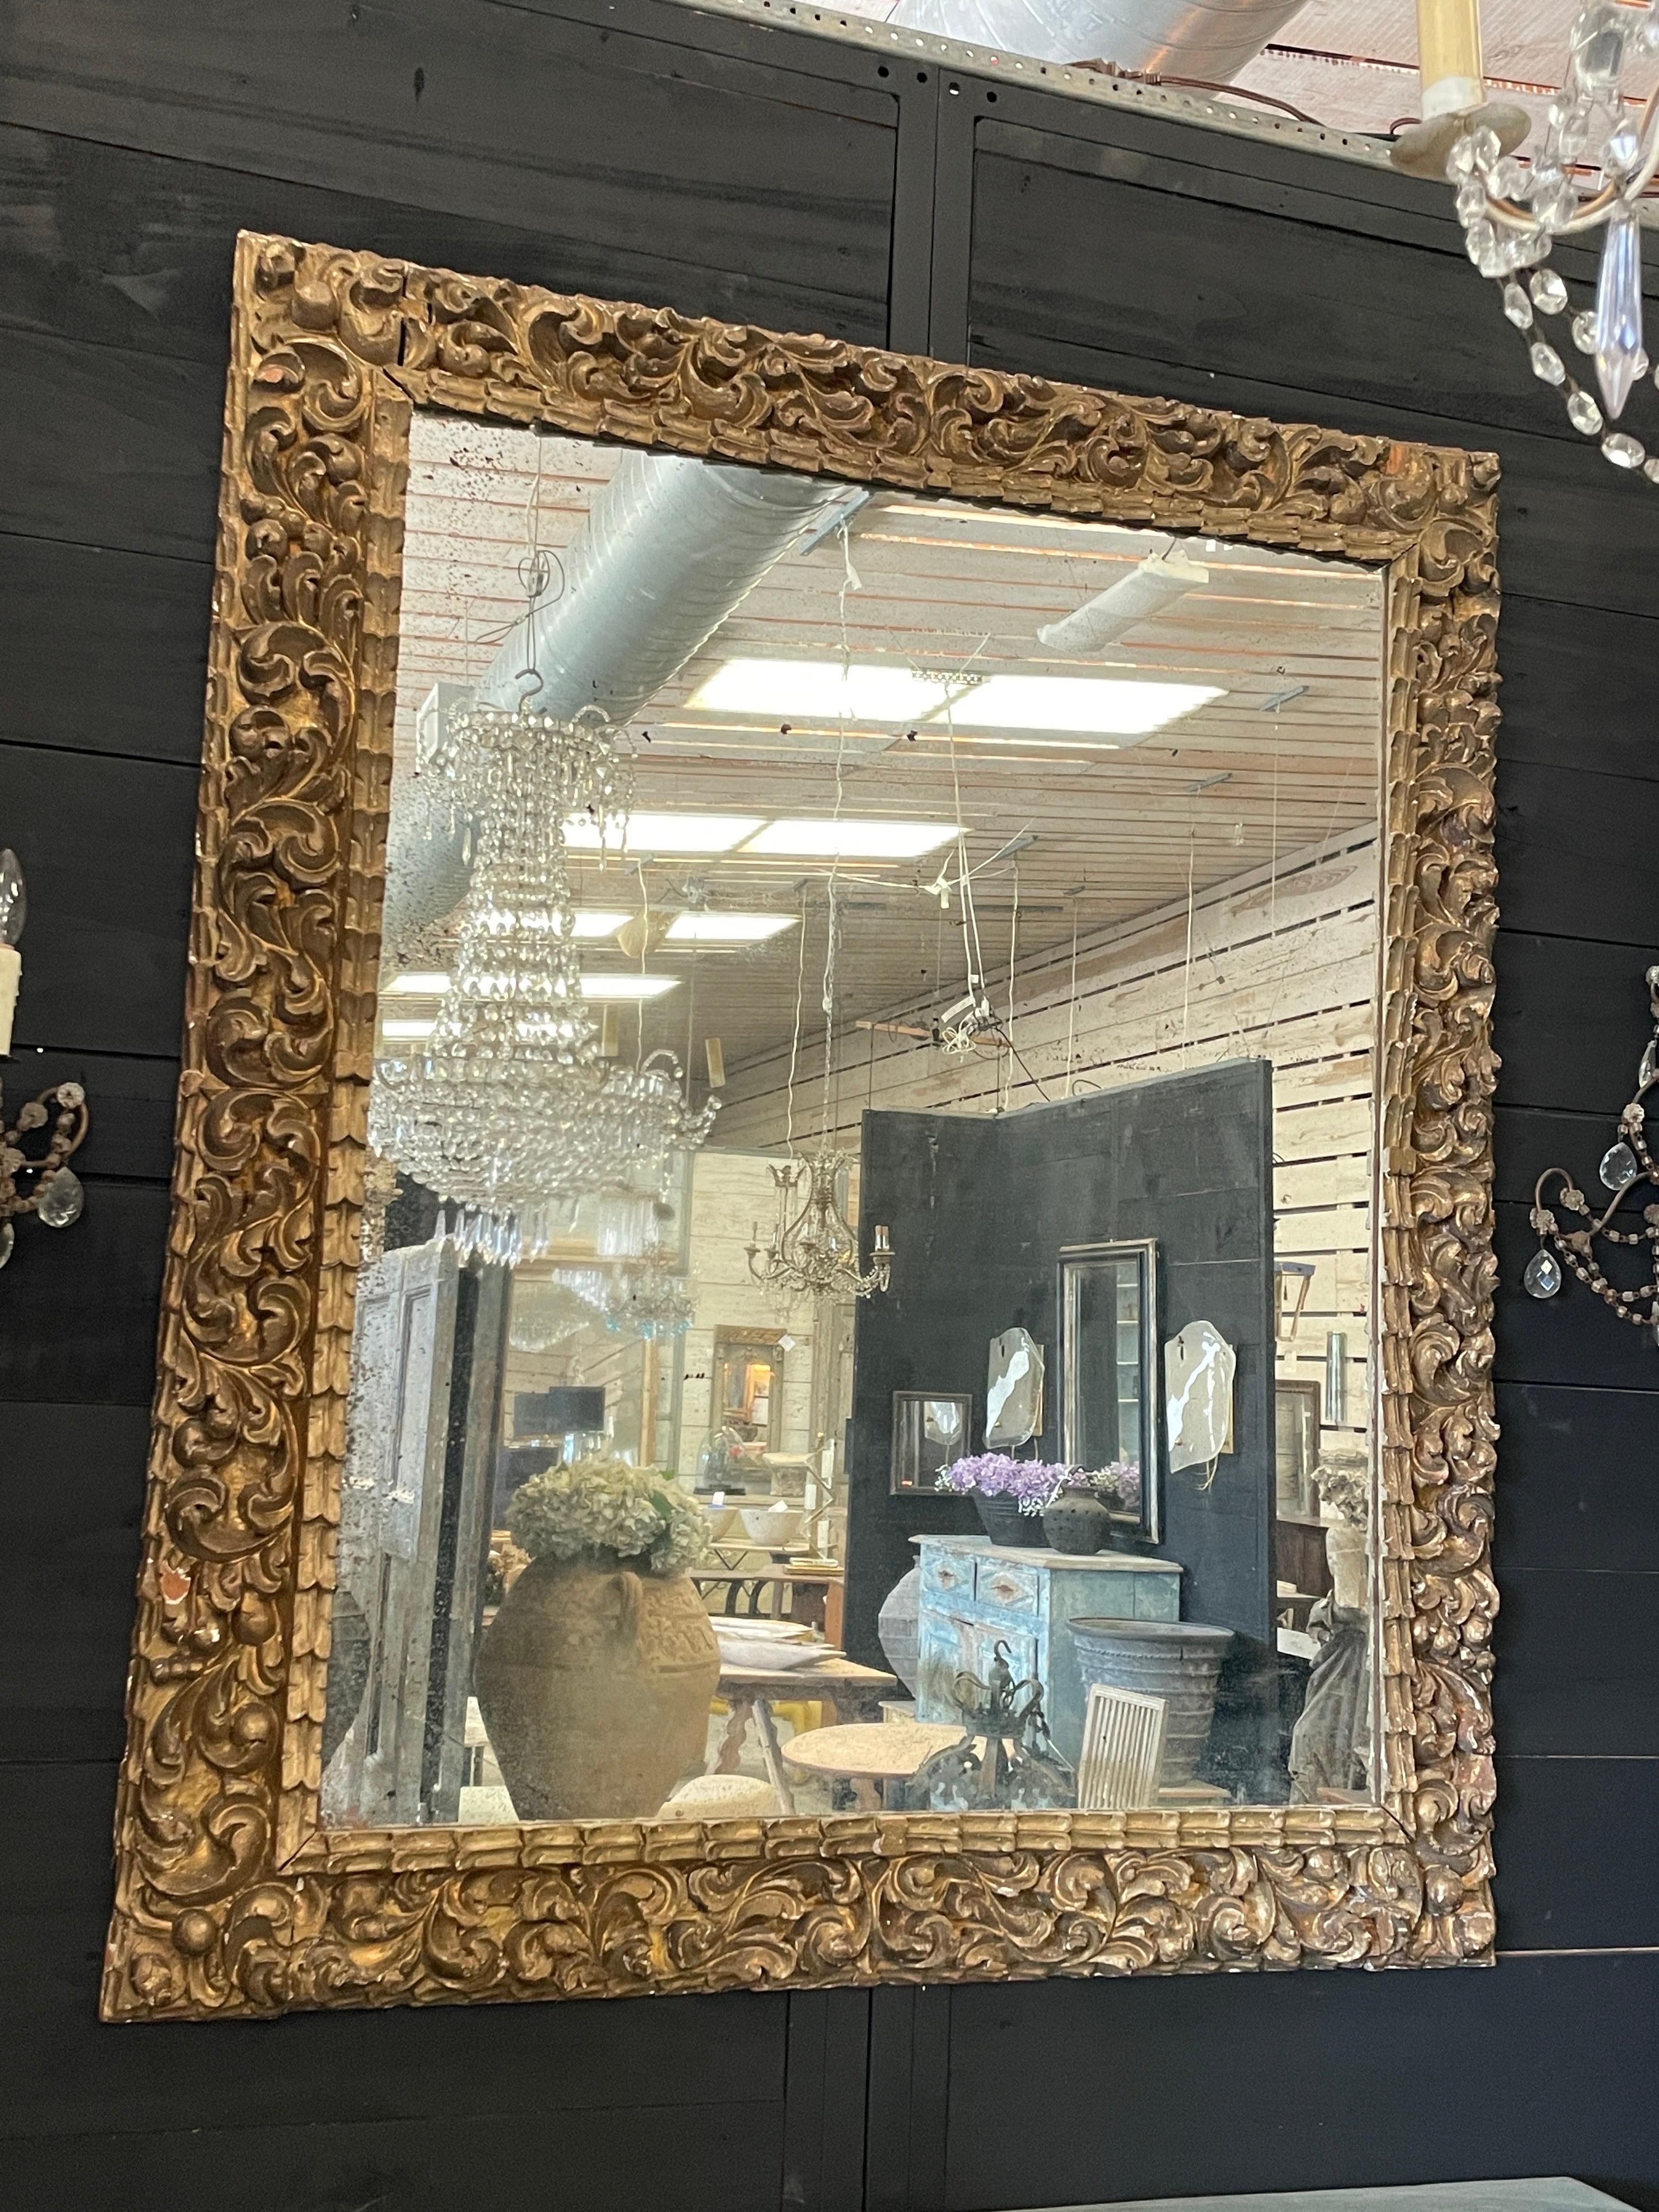 This lovely Mirror Frames is  from the 1700s Italy and replaced 19th century mirror is so charming. It has a few missing pieces but not anything that takes away from its beauty. In fact it adds to the antiquity of it. 
It’s a nice size at 49” w x